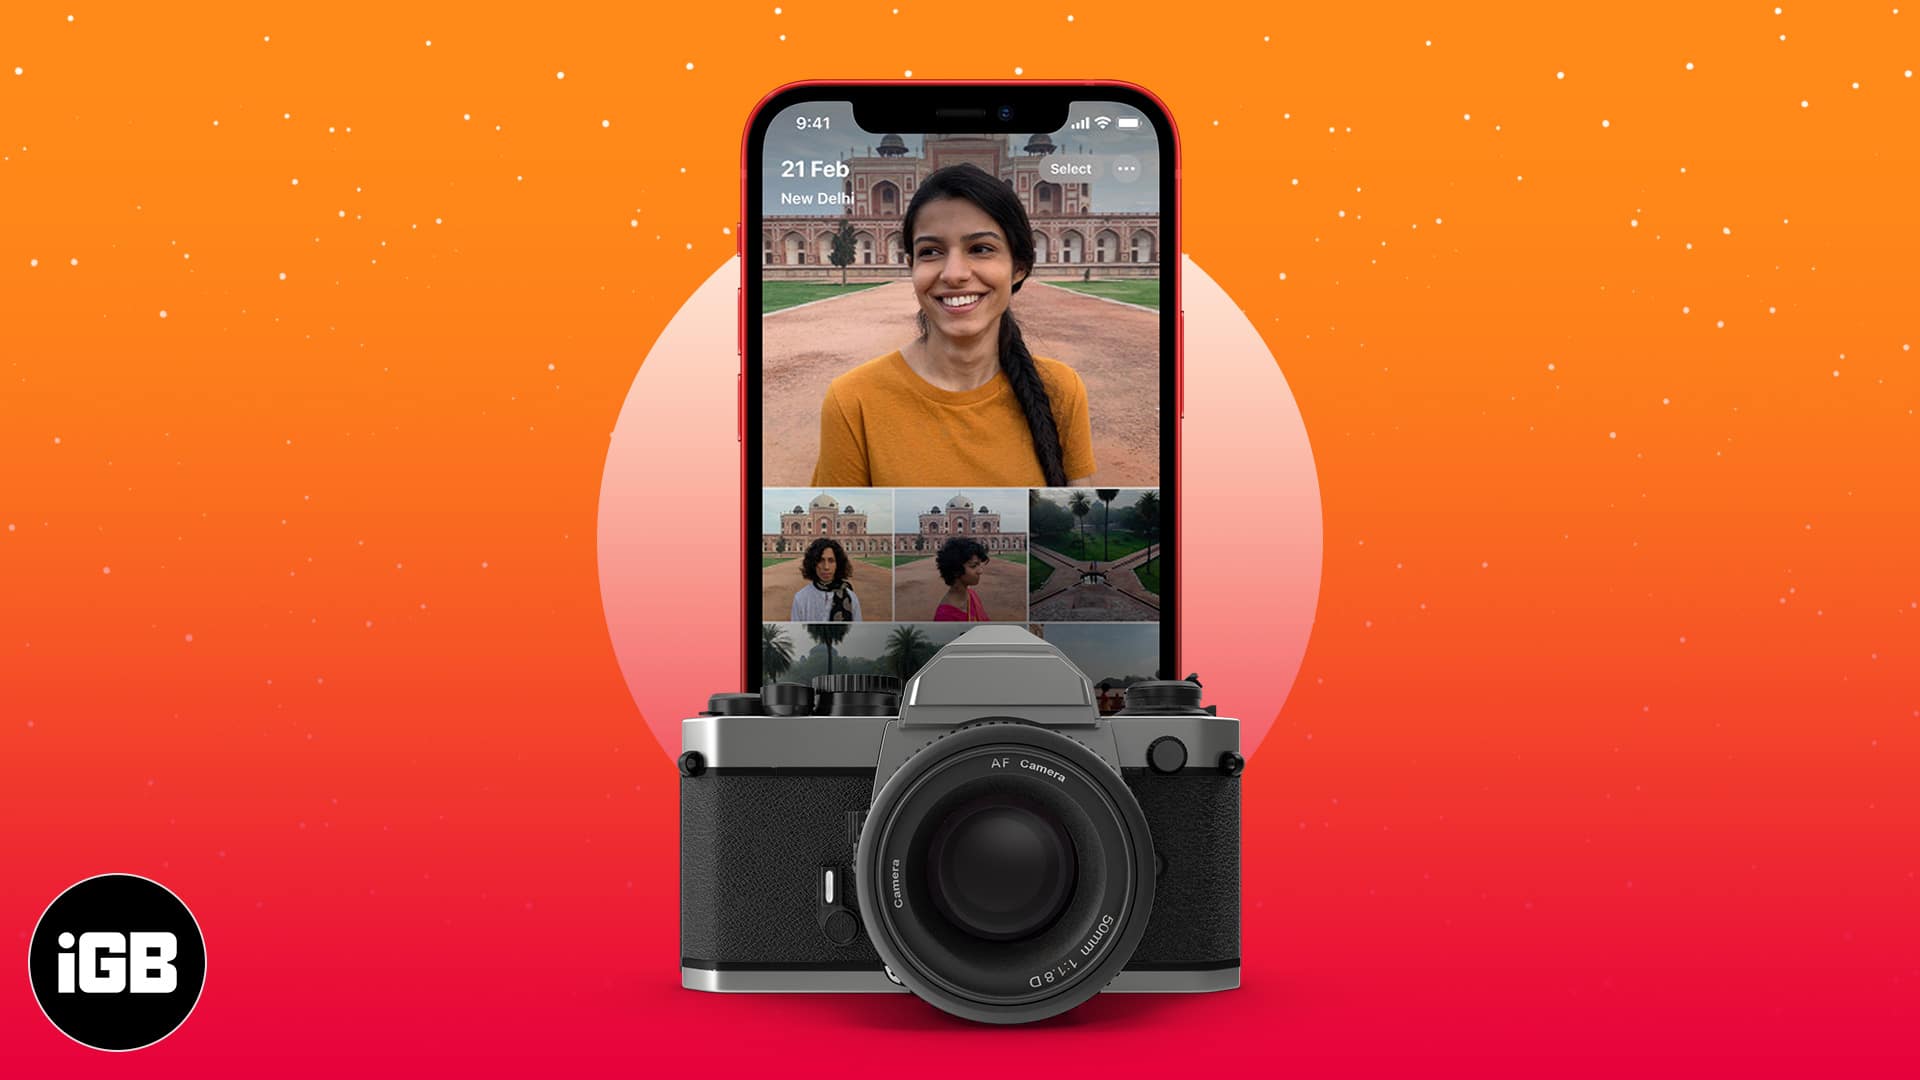 How to transfer photos from camera to iPhone